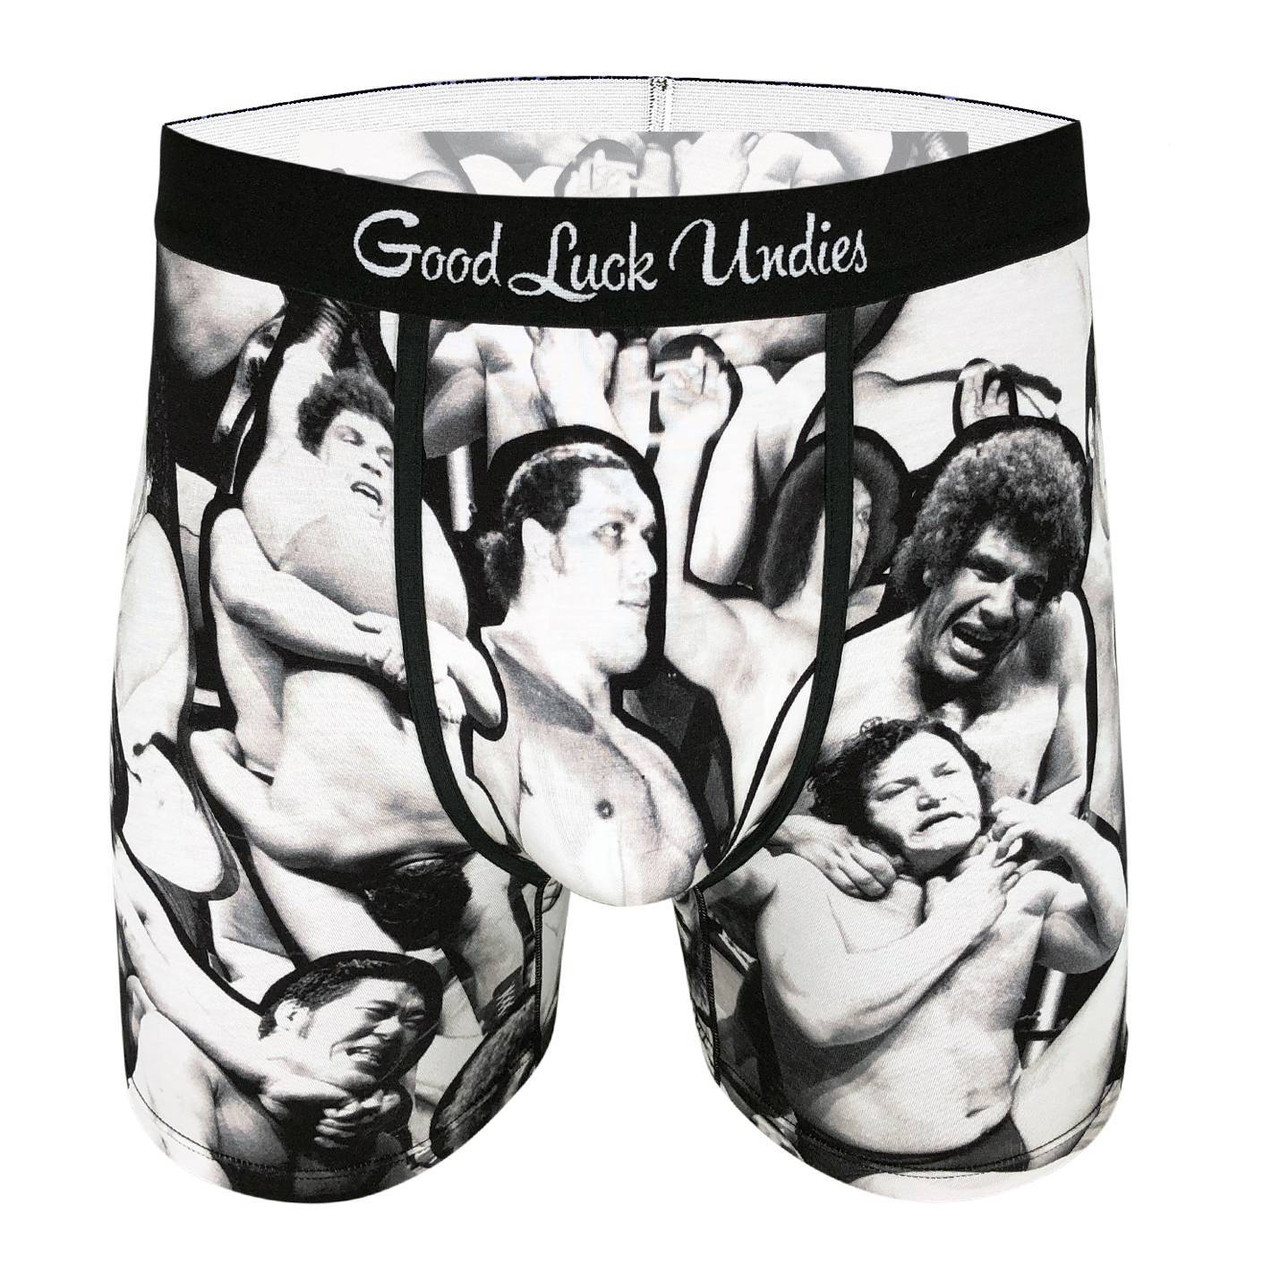 Good Luck Undies Andre The Giant Collage Boxer Briefs No Chafe Anti Roll SM